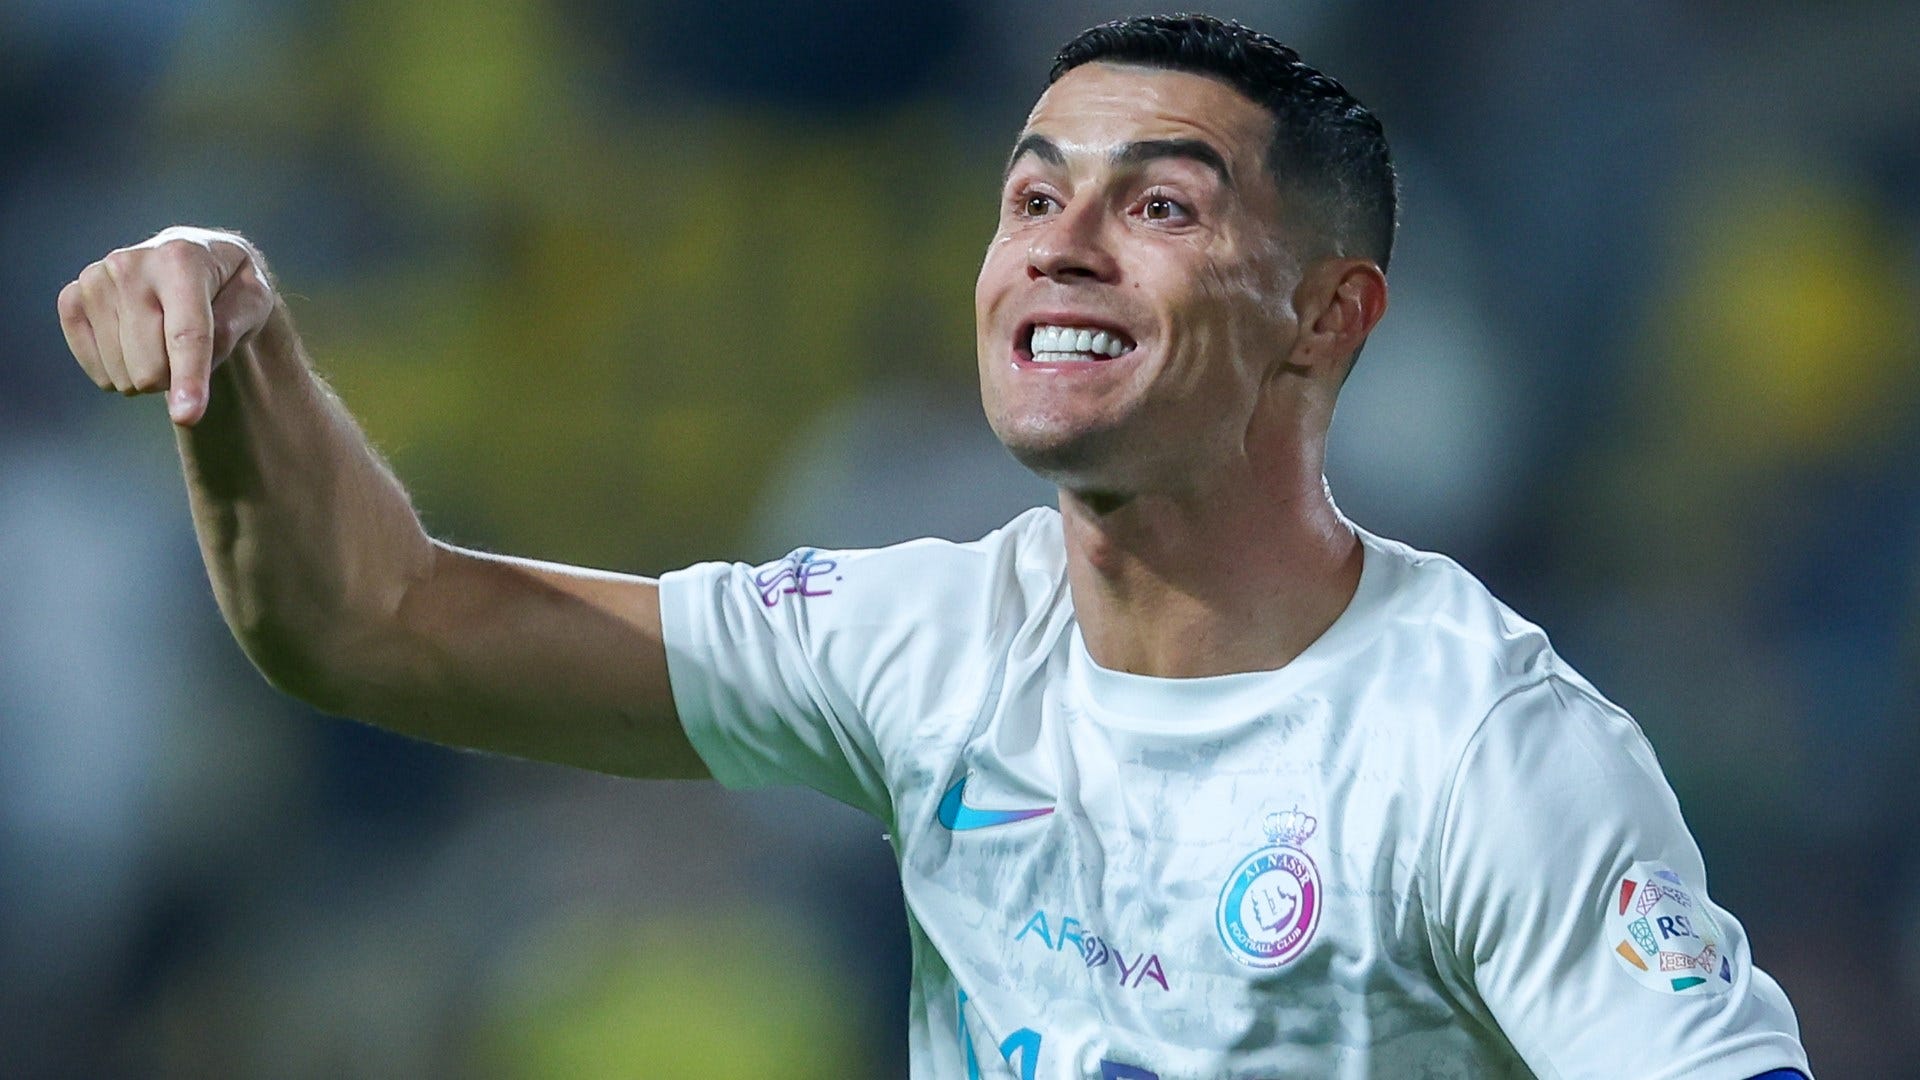 Not done yet!' - Cristiano Ronaldo fires message after hitting yet another  career milestone in goal-scoring display for Al-Nassr against Al-Riyadh